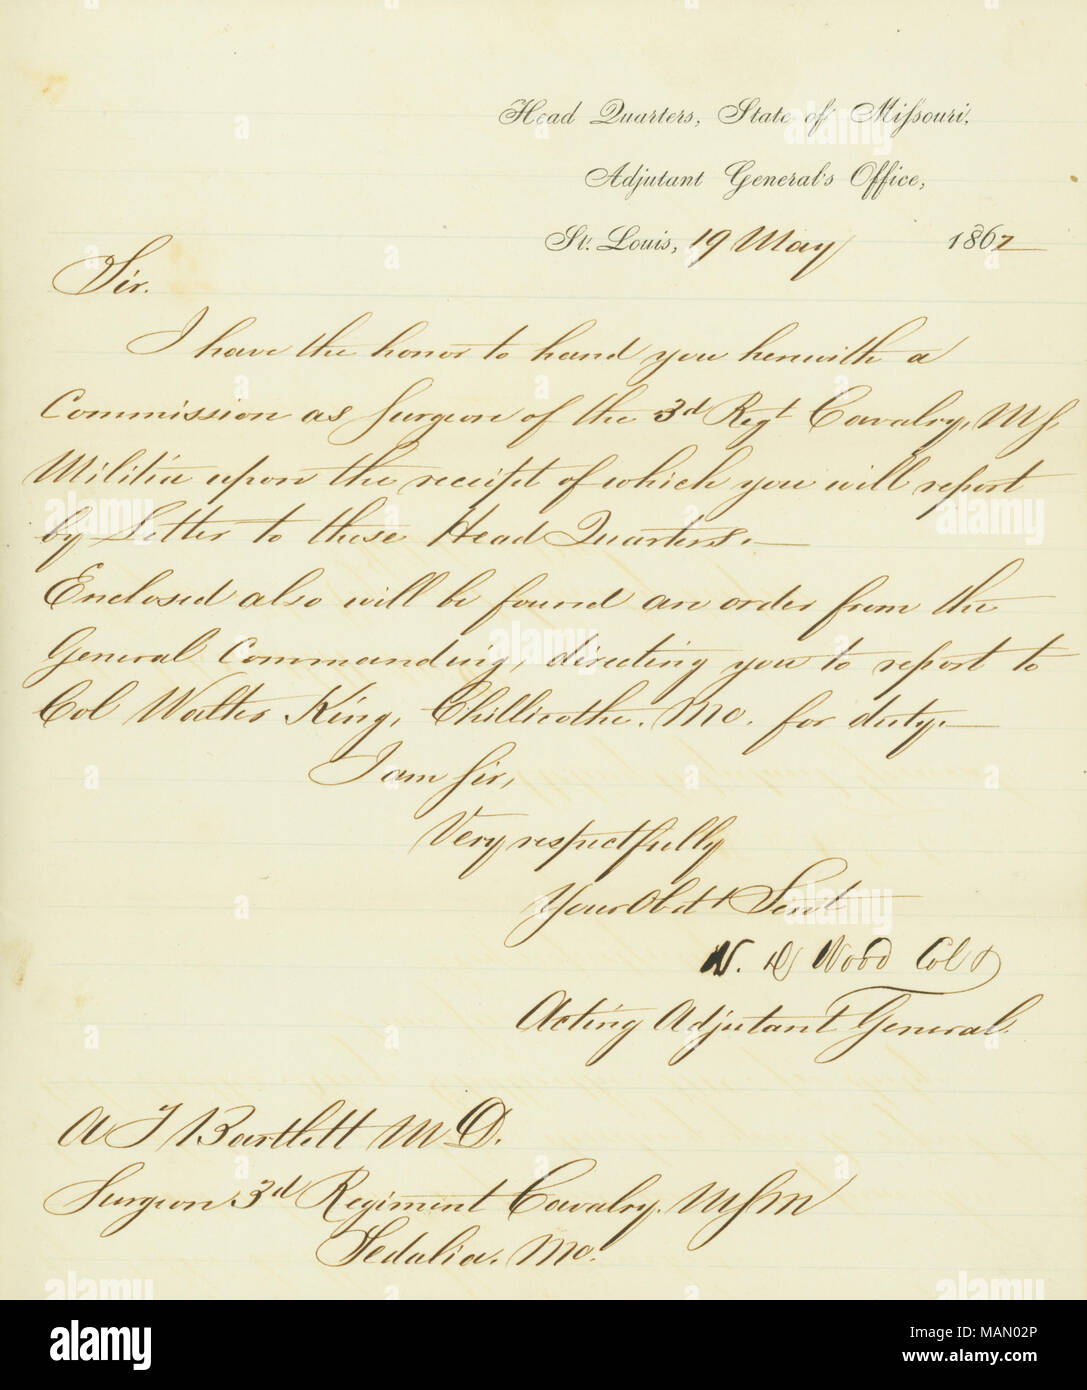 Letter from W.D. Wood, Col and Acting Adjutant General, Head Quarters, State of Missouri, Adjutant General's Office, St. Louis, to A.T. Bartlett, M.D., Surgeon 3d. Regiment Cavalry M.S.M., Sedalia, Mo., stating that Bartlett has been given a commission as a Surgeon in the 3rd Cavalry Regiment of the Missouri State Militia, and encloses an order to report to Colonel Walter King at Chillicothe, Missouri, for duty, May 19, 1862. Aurelius T. Bartlett Collection, Missouri History Museum, St. Louis, Missouri. Stock Photo